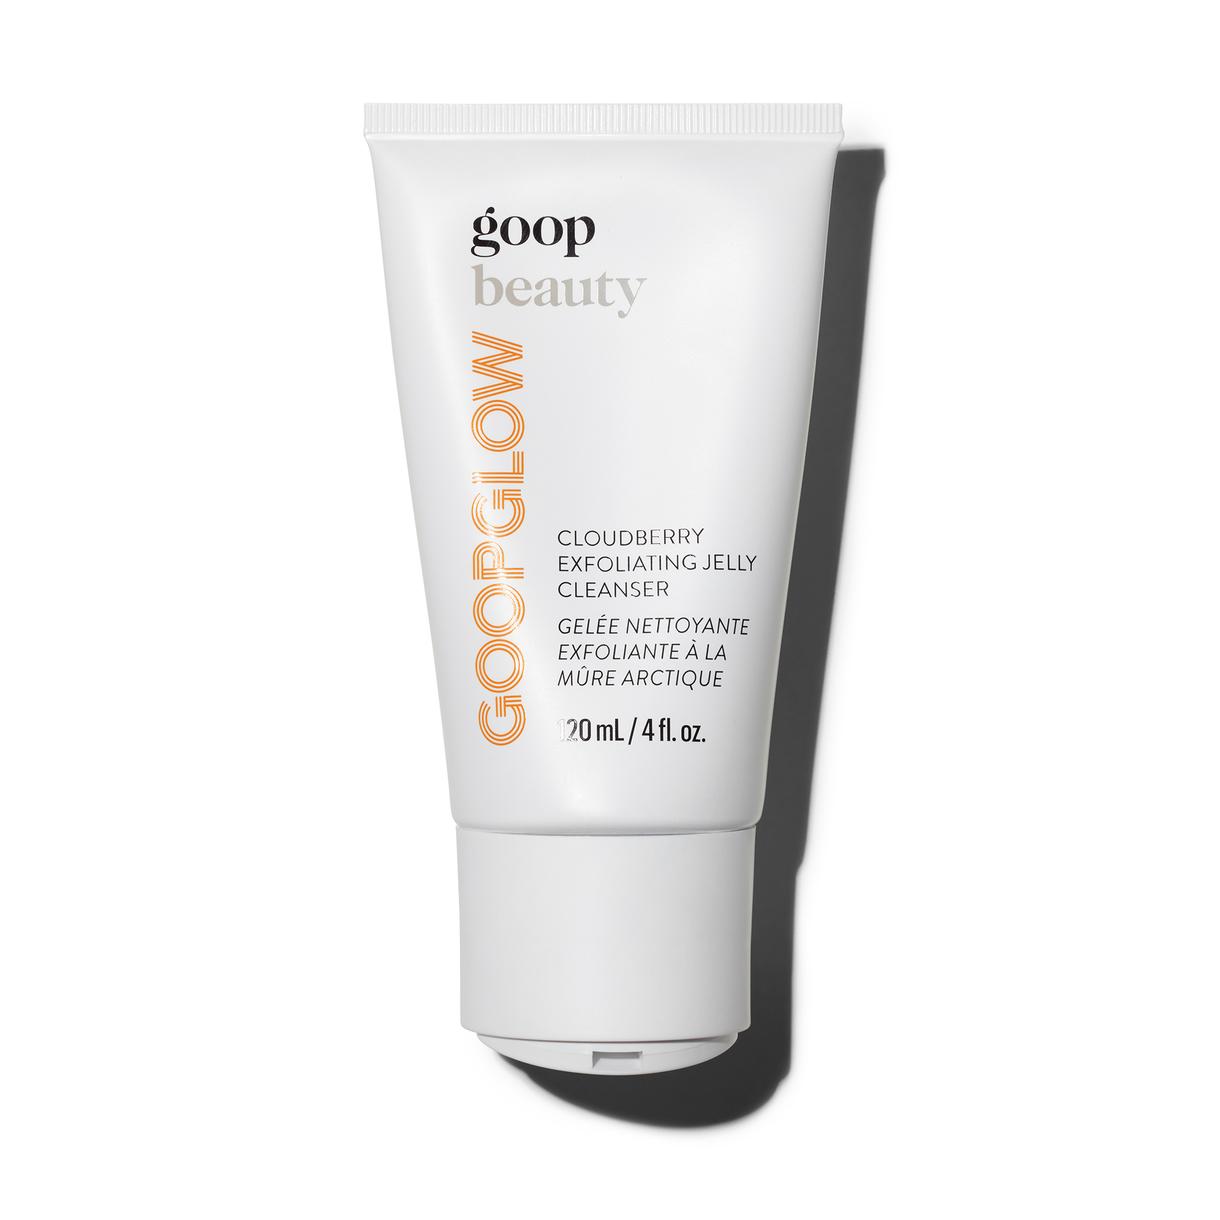 goop Beauty Cloudberry Exfoliating Jelly Cleanser